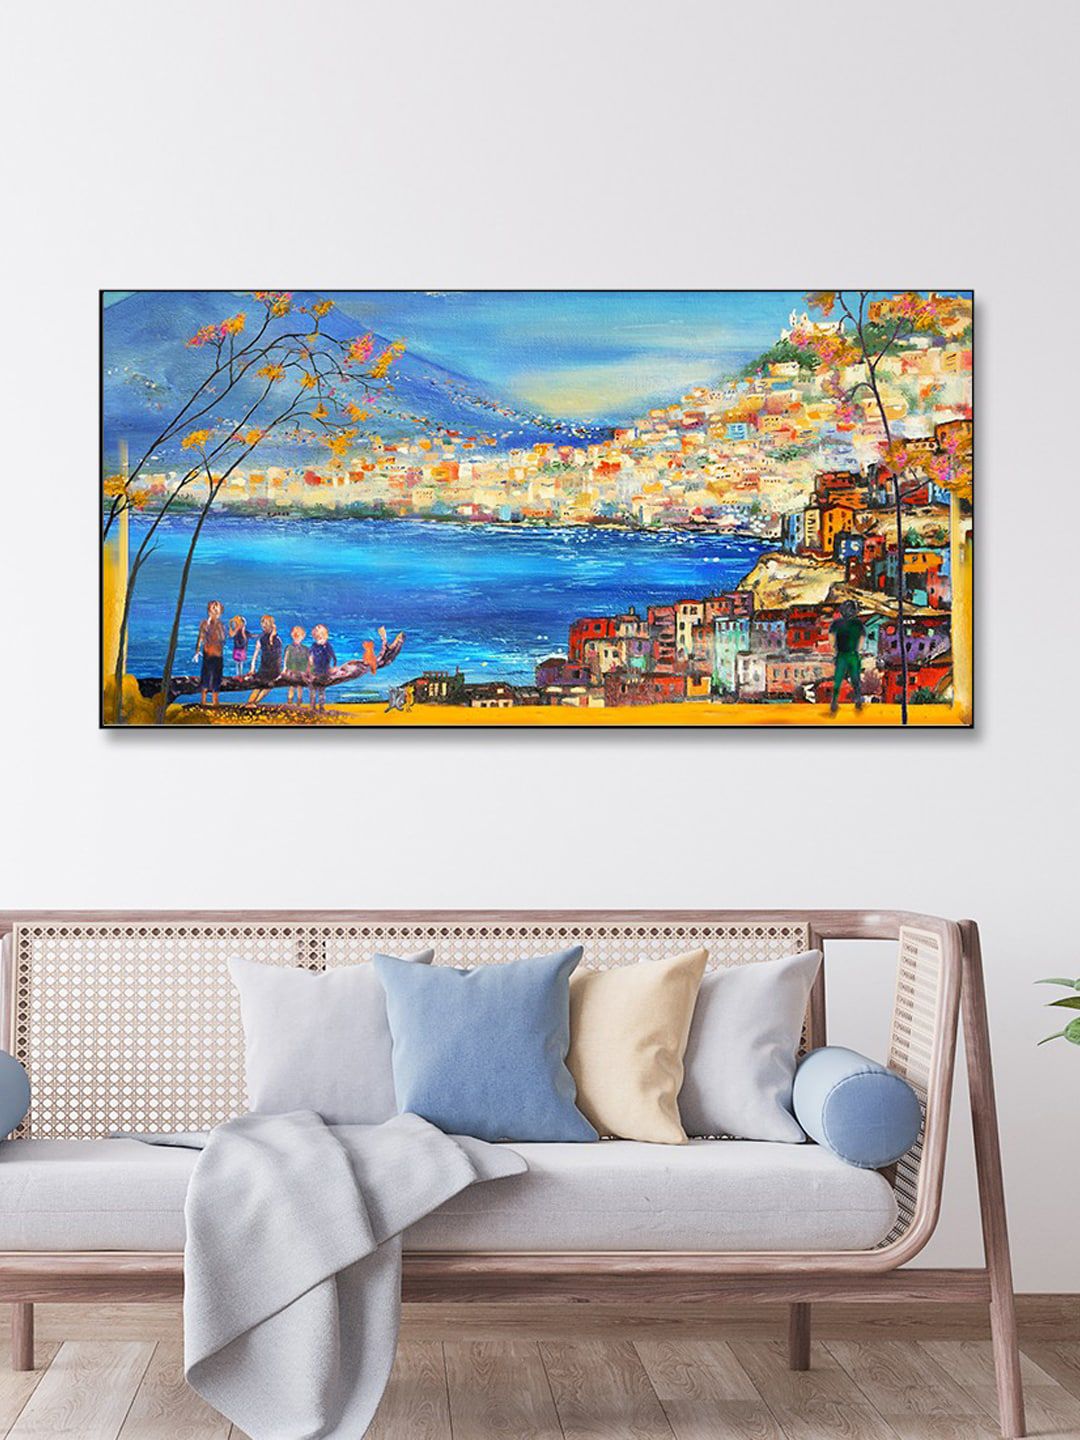 WALLMANTRA Blue & Yellow Painted Italian Landscape View Framed Wall Art Price in India